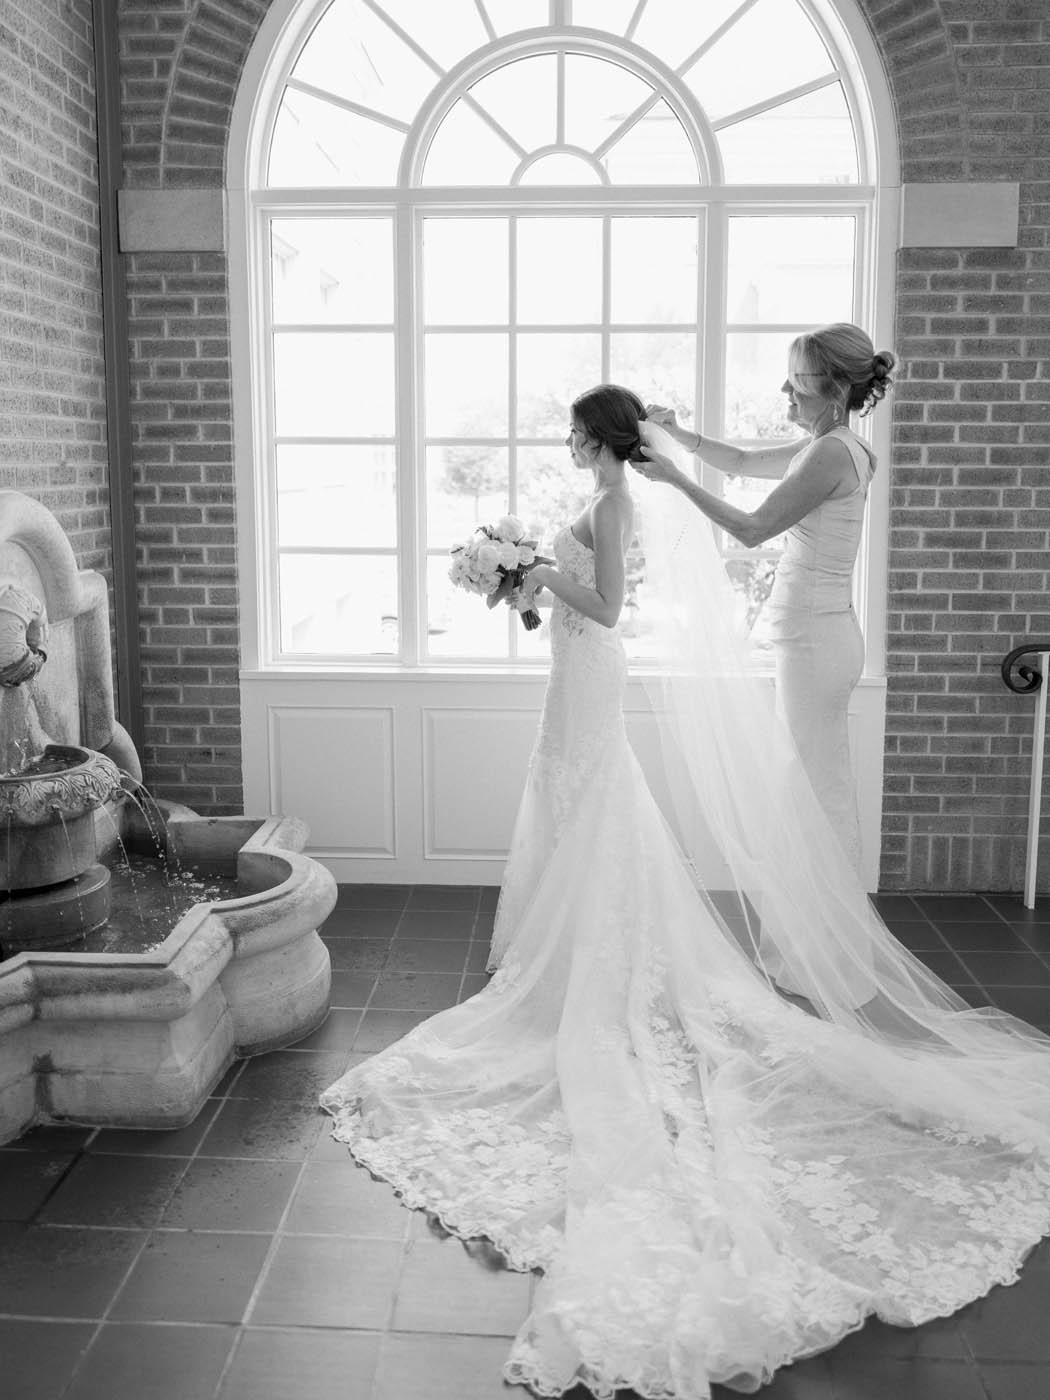 The bride gets her veil put on by her mother